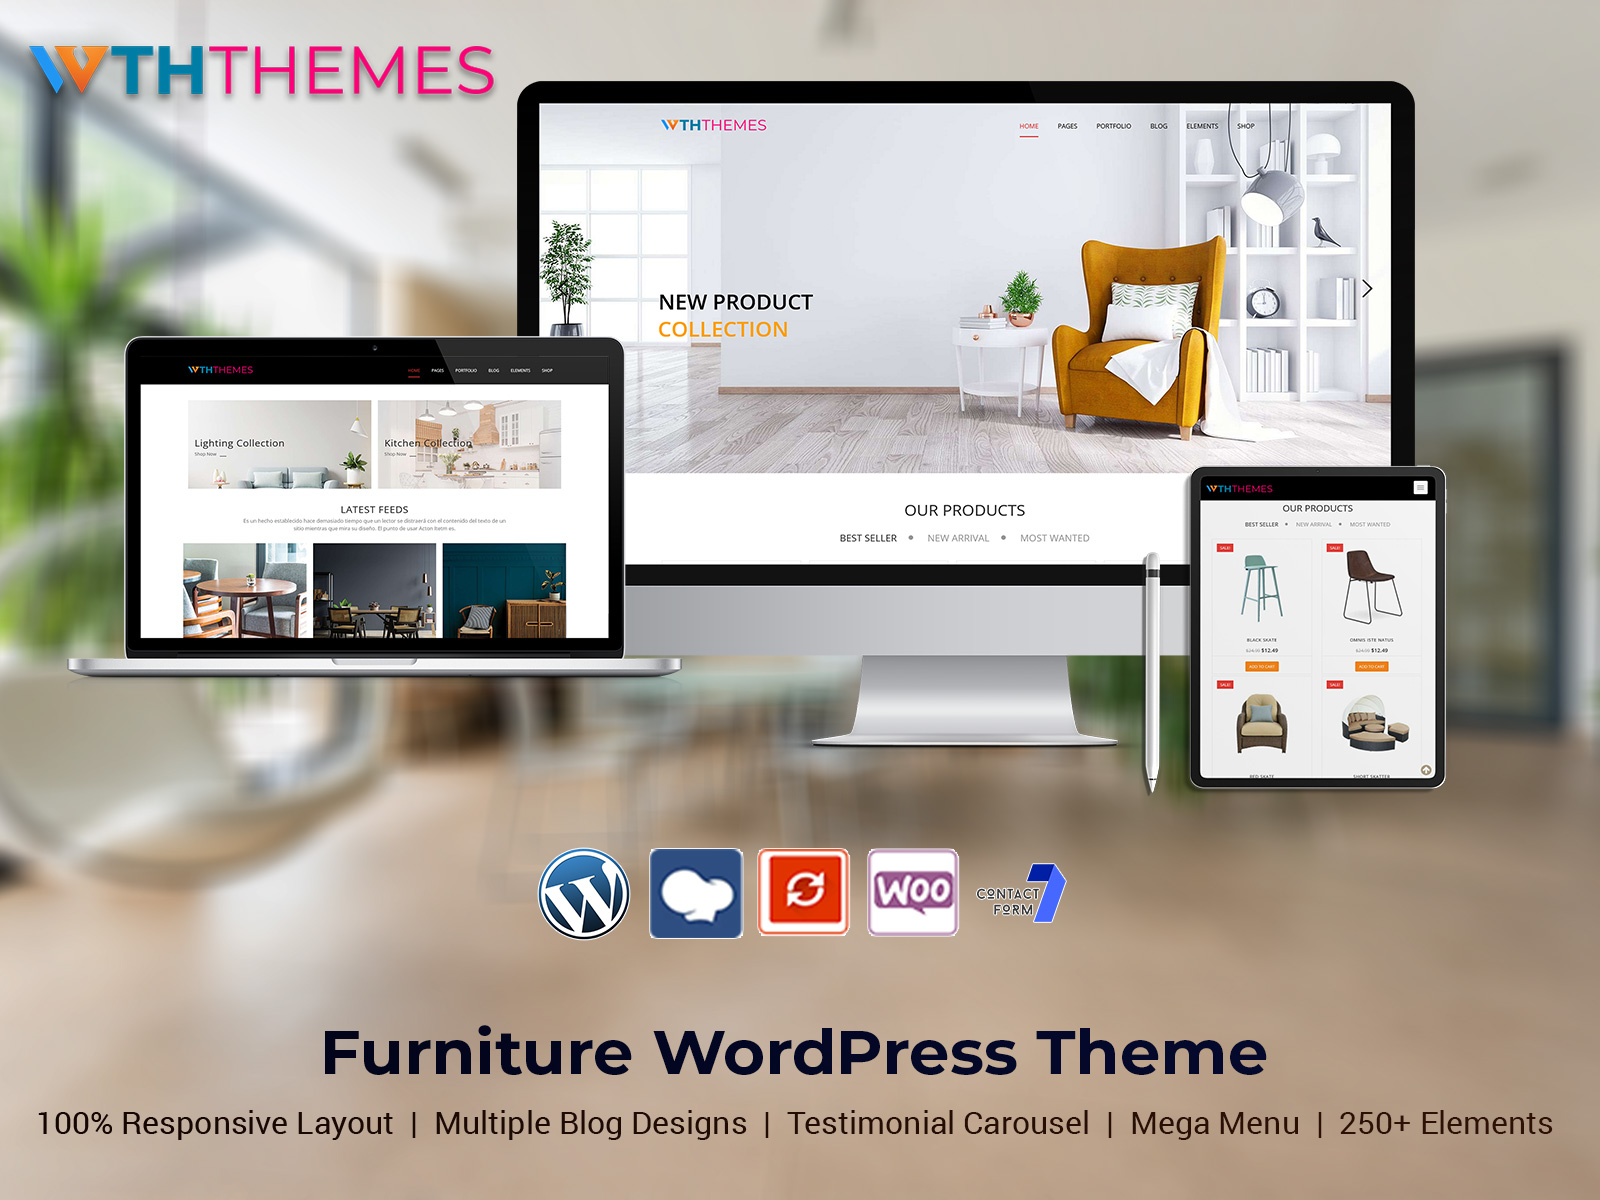 Create A Professional Website With A Furniture WordPress Theme